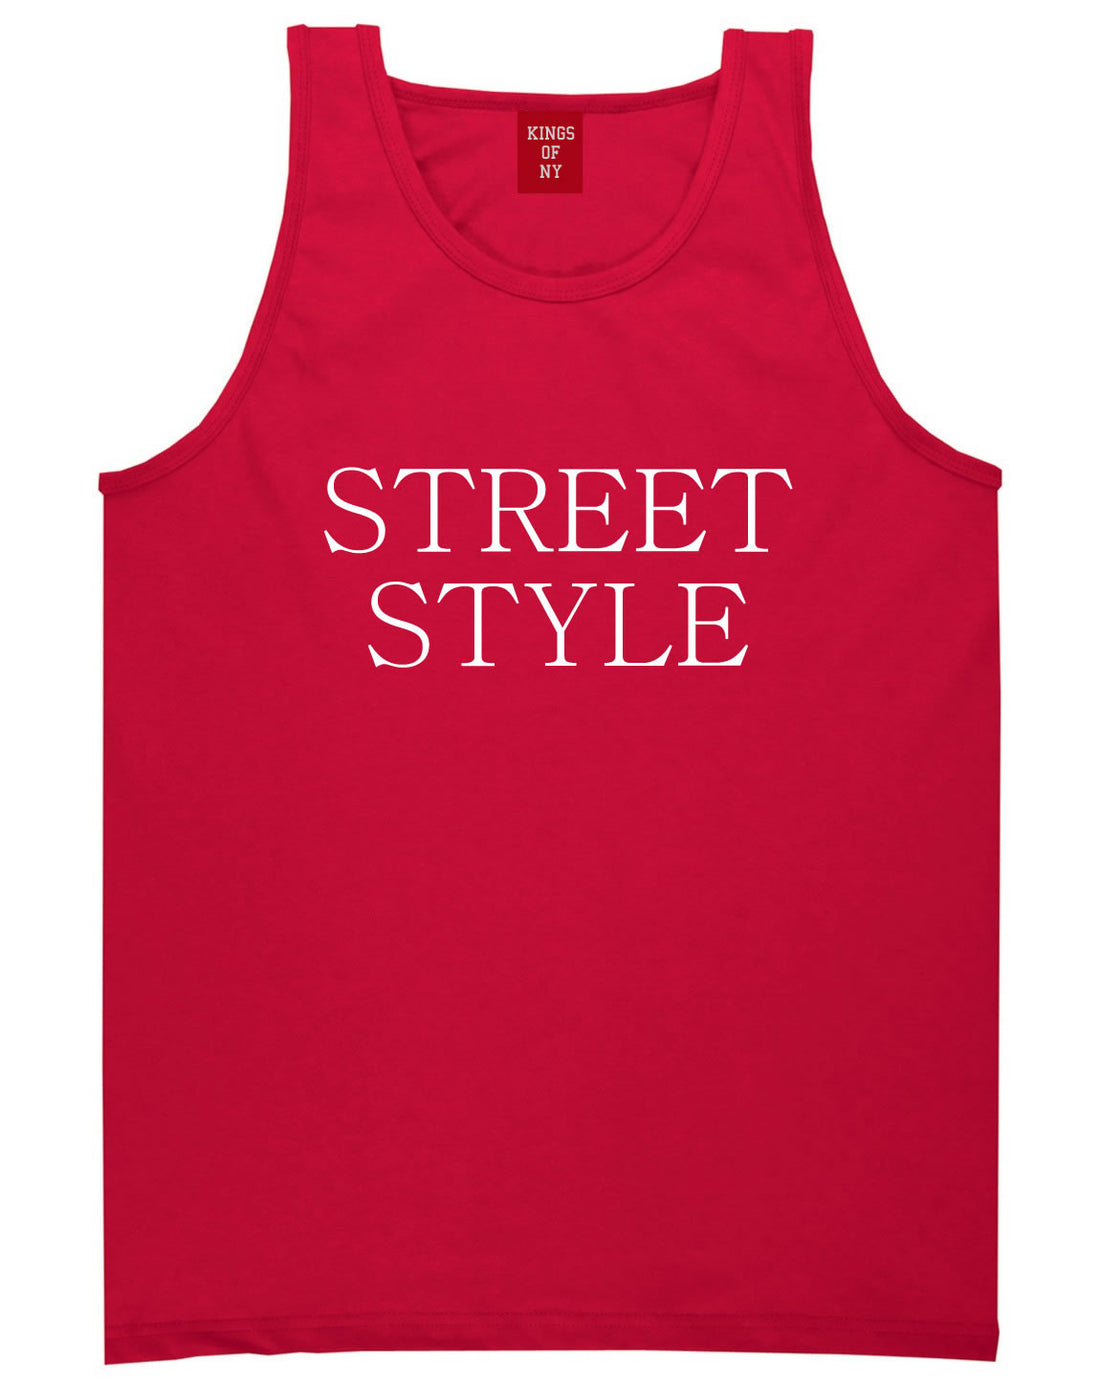 Street Style Photography Tank Top in Red by Kings Of NY